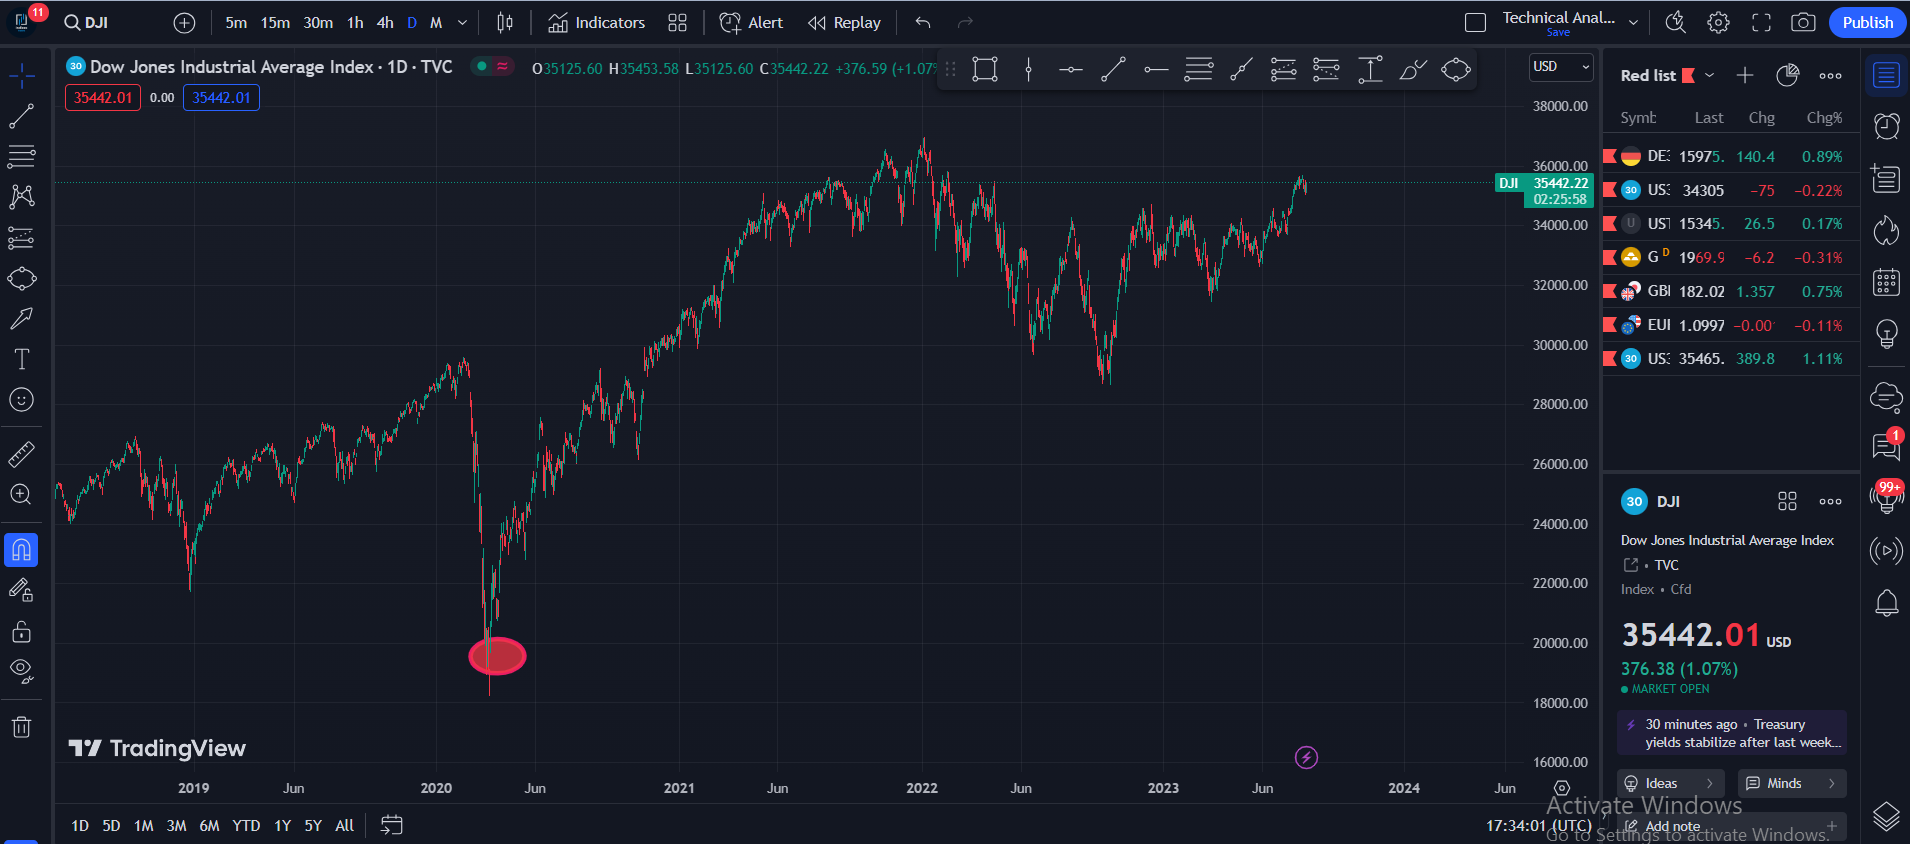 Dowjones 11th rate hike since march 2022 